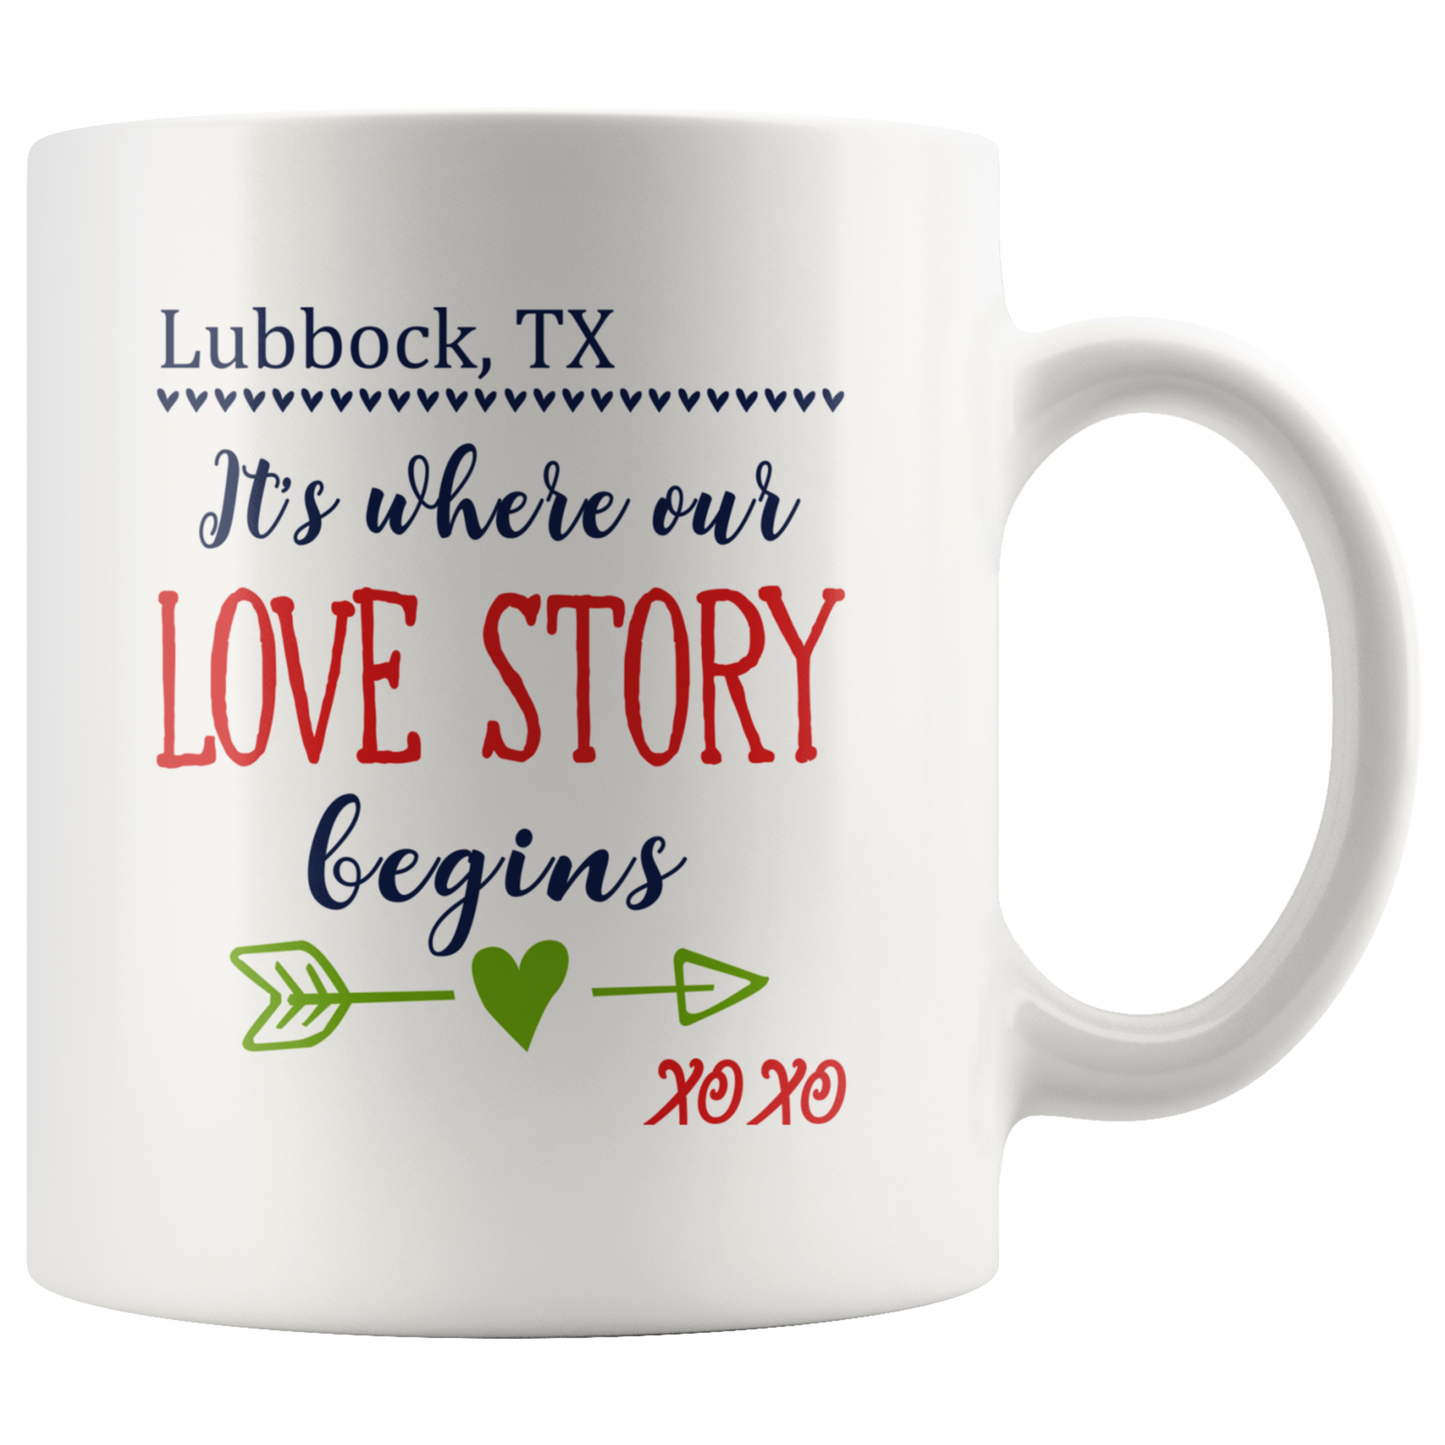 M-Our-20458079-sp-19440 - Mothers Day Gifts For Wife Mug - Lubbock Texas TX Its Where